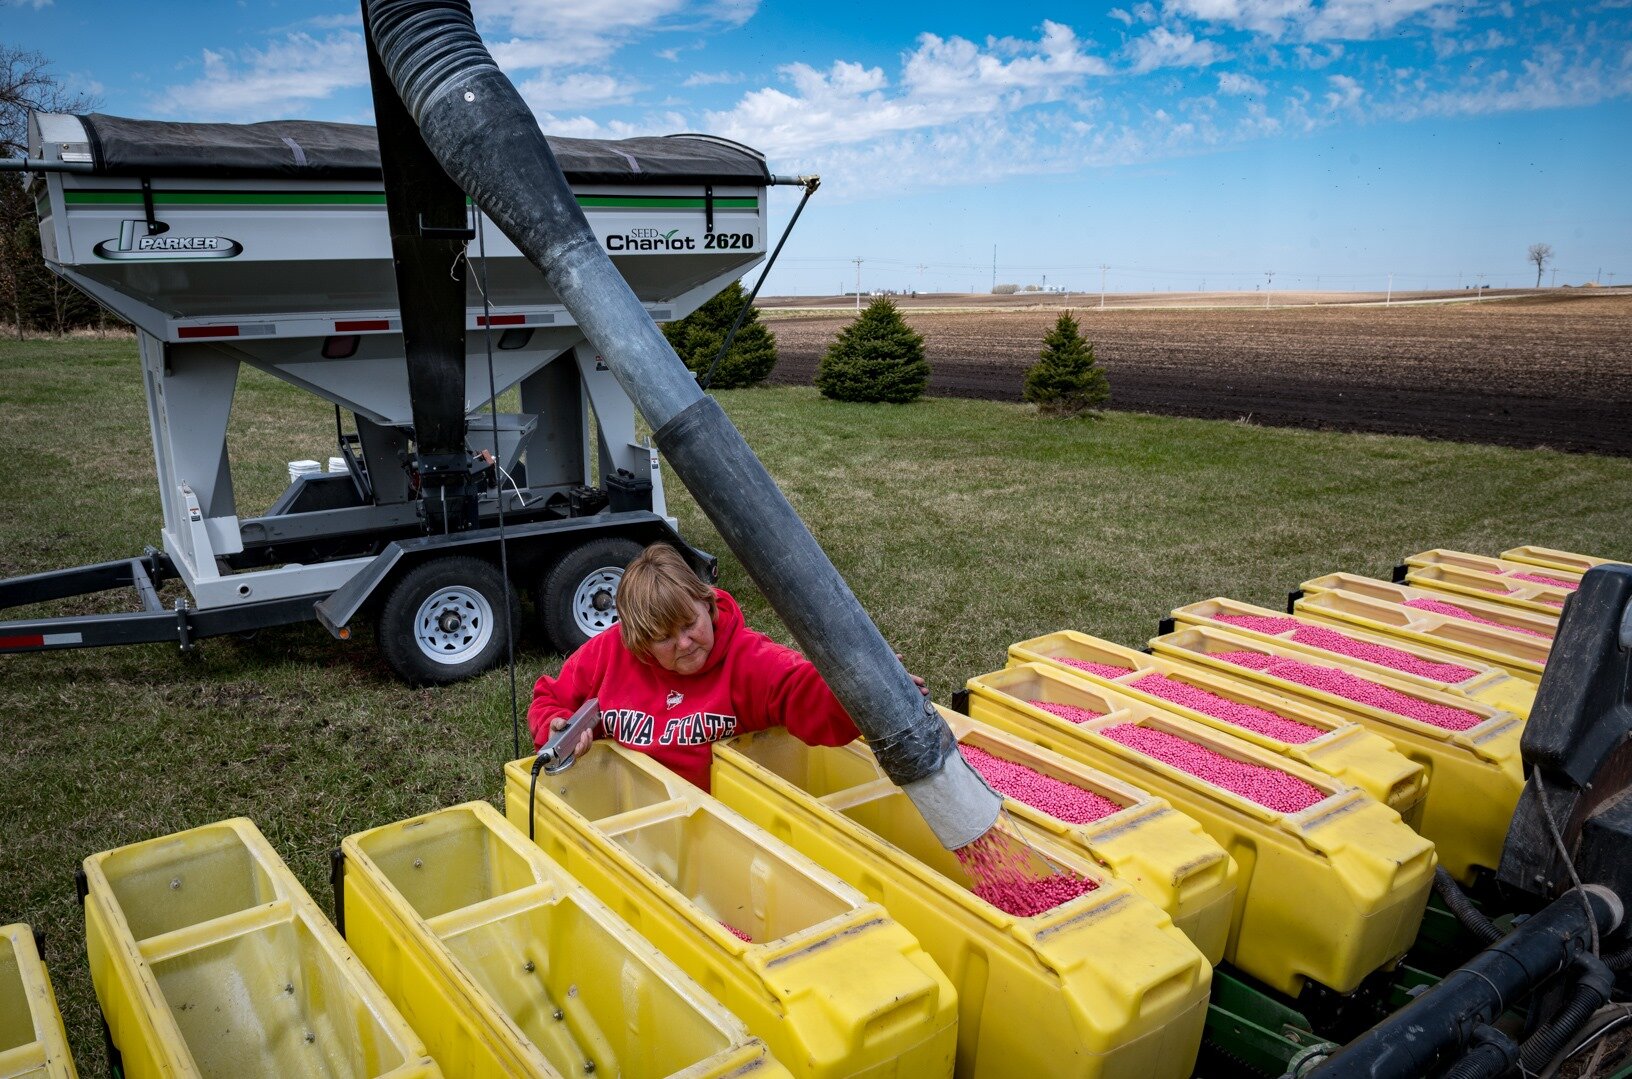  April Hemmes, a farmer from Hampton, fills a planter with soybeans on the first day of planting in April. Hemmes and other farmers across the state planted their crops under the uncertainty of a trade war with China and an emerging pandemic. 